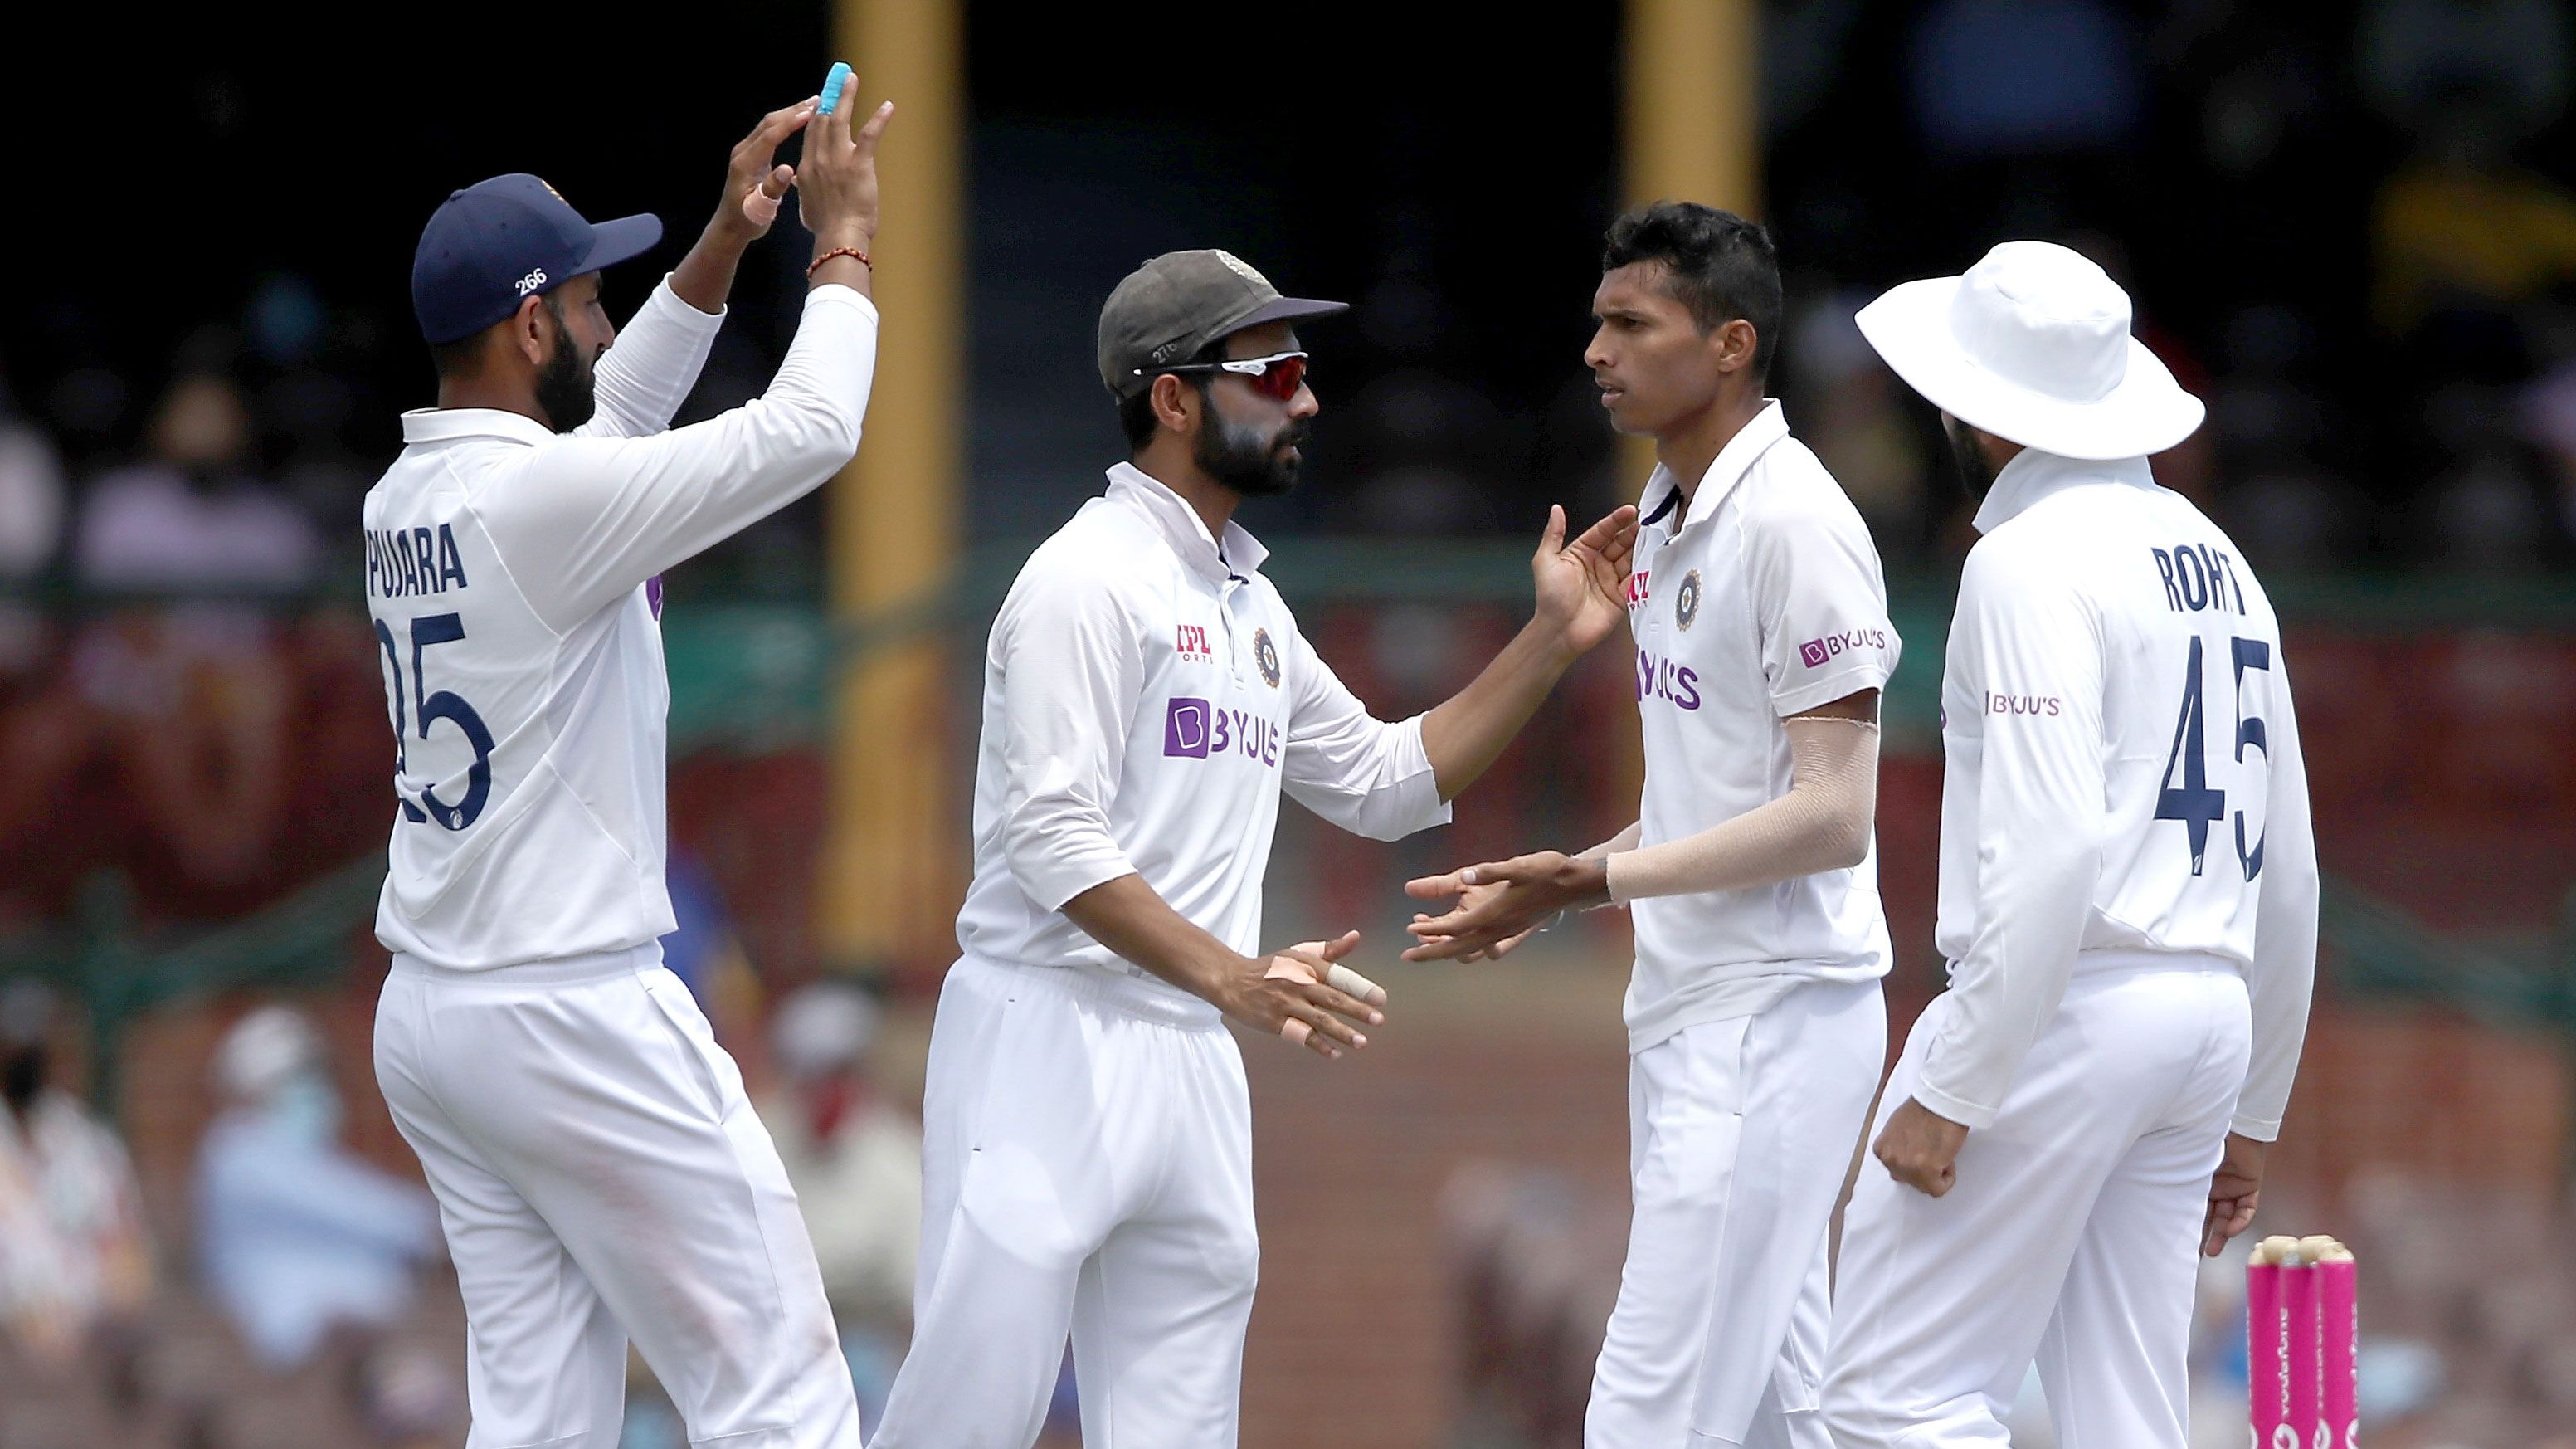 India players celebrate a wicket during the SCG Test.